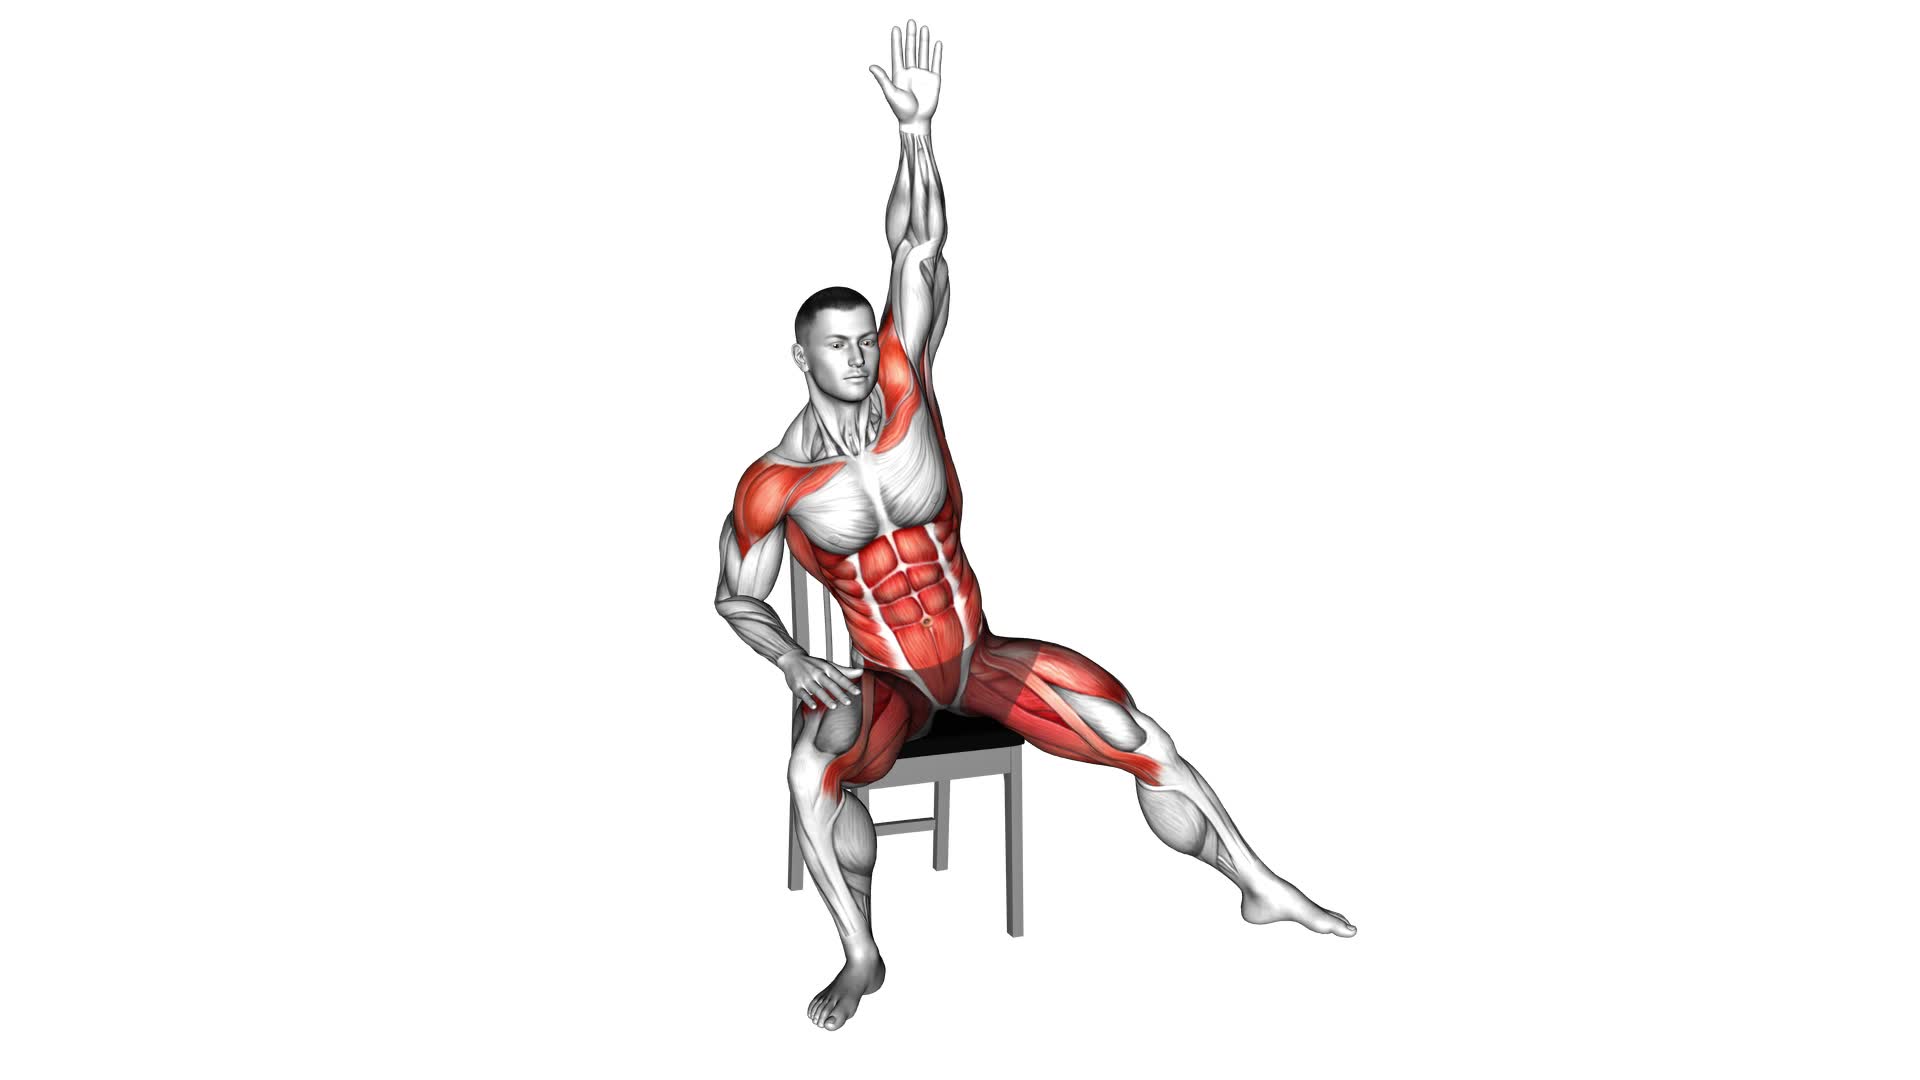 Sitting Side Step on Chair (male) - Video Exercise Guide & Tips